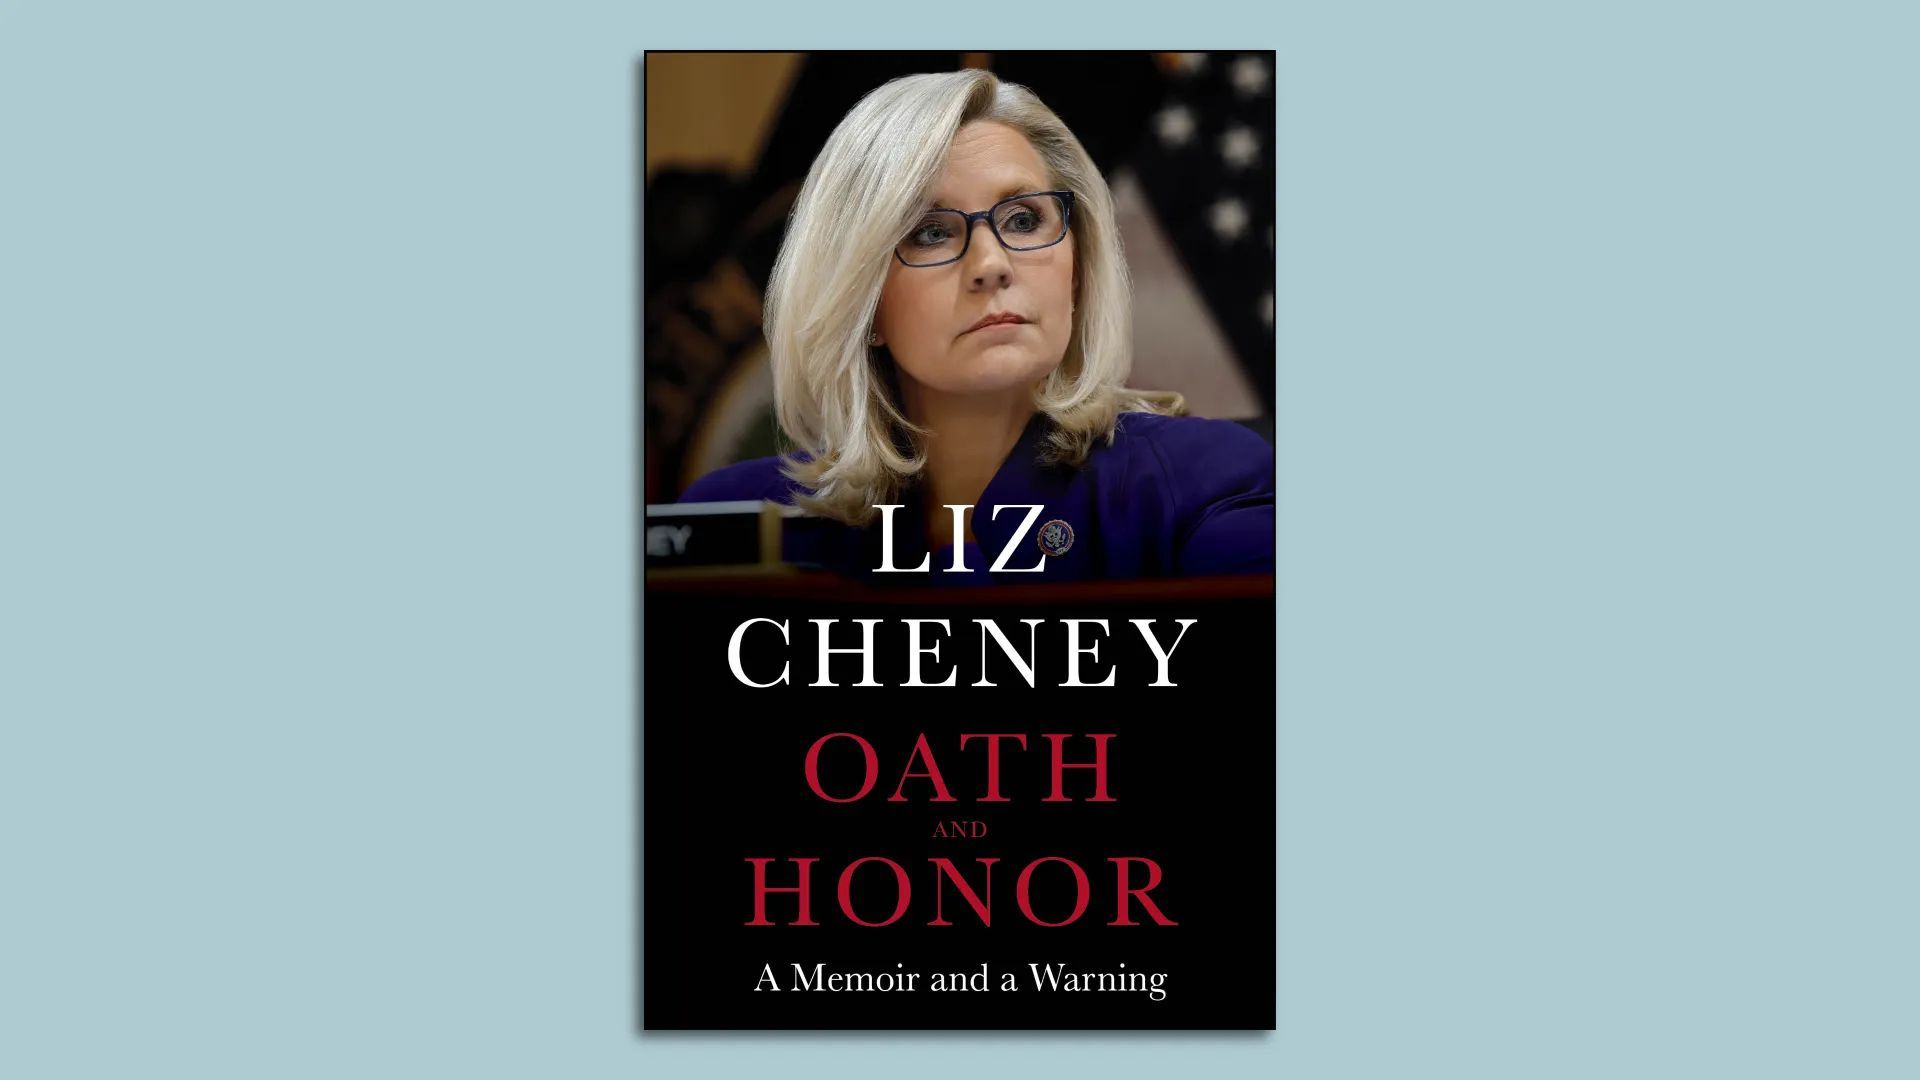 Liz Cheney book cover for "Oath and Honor"